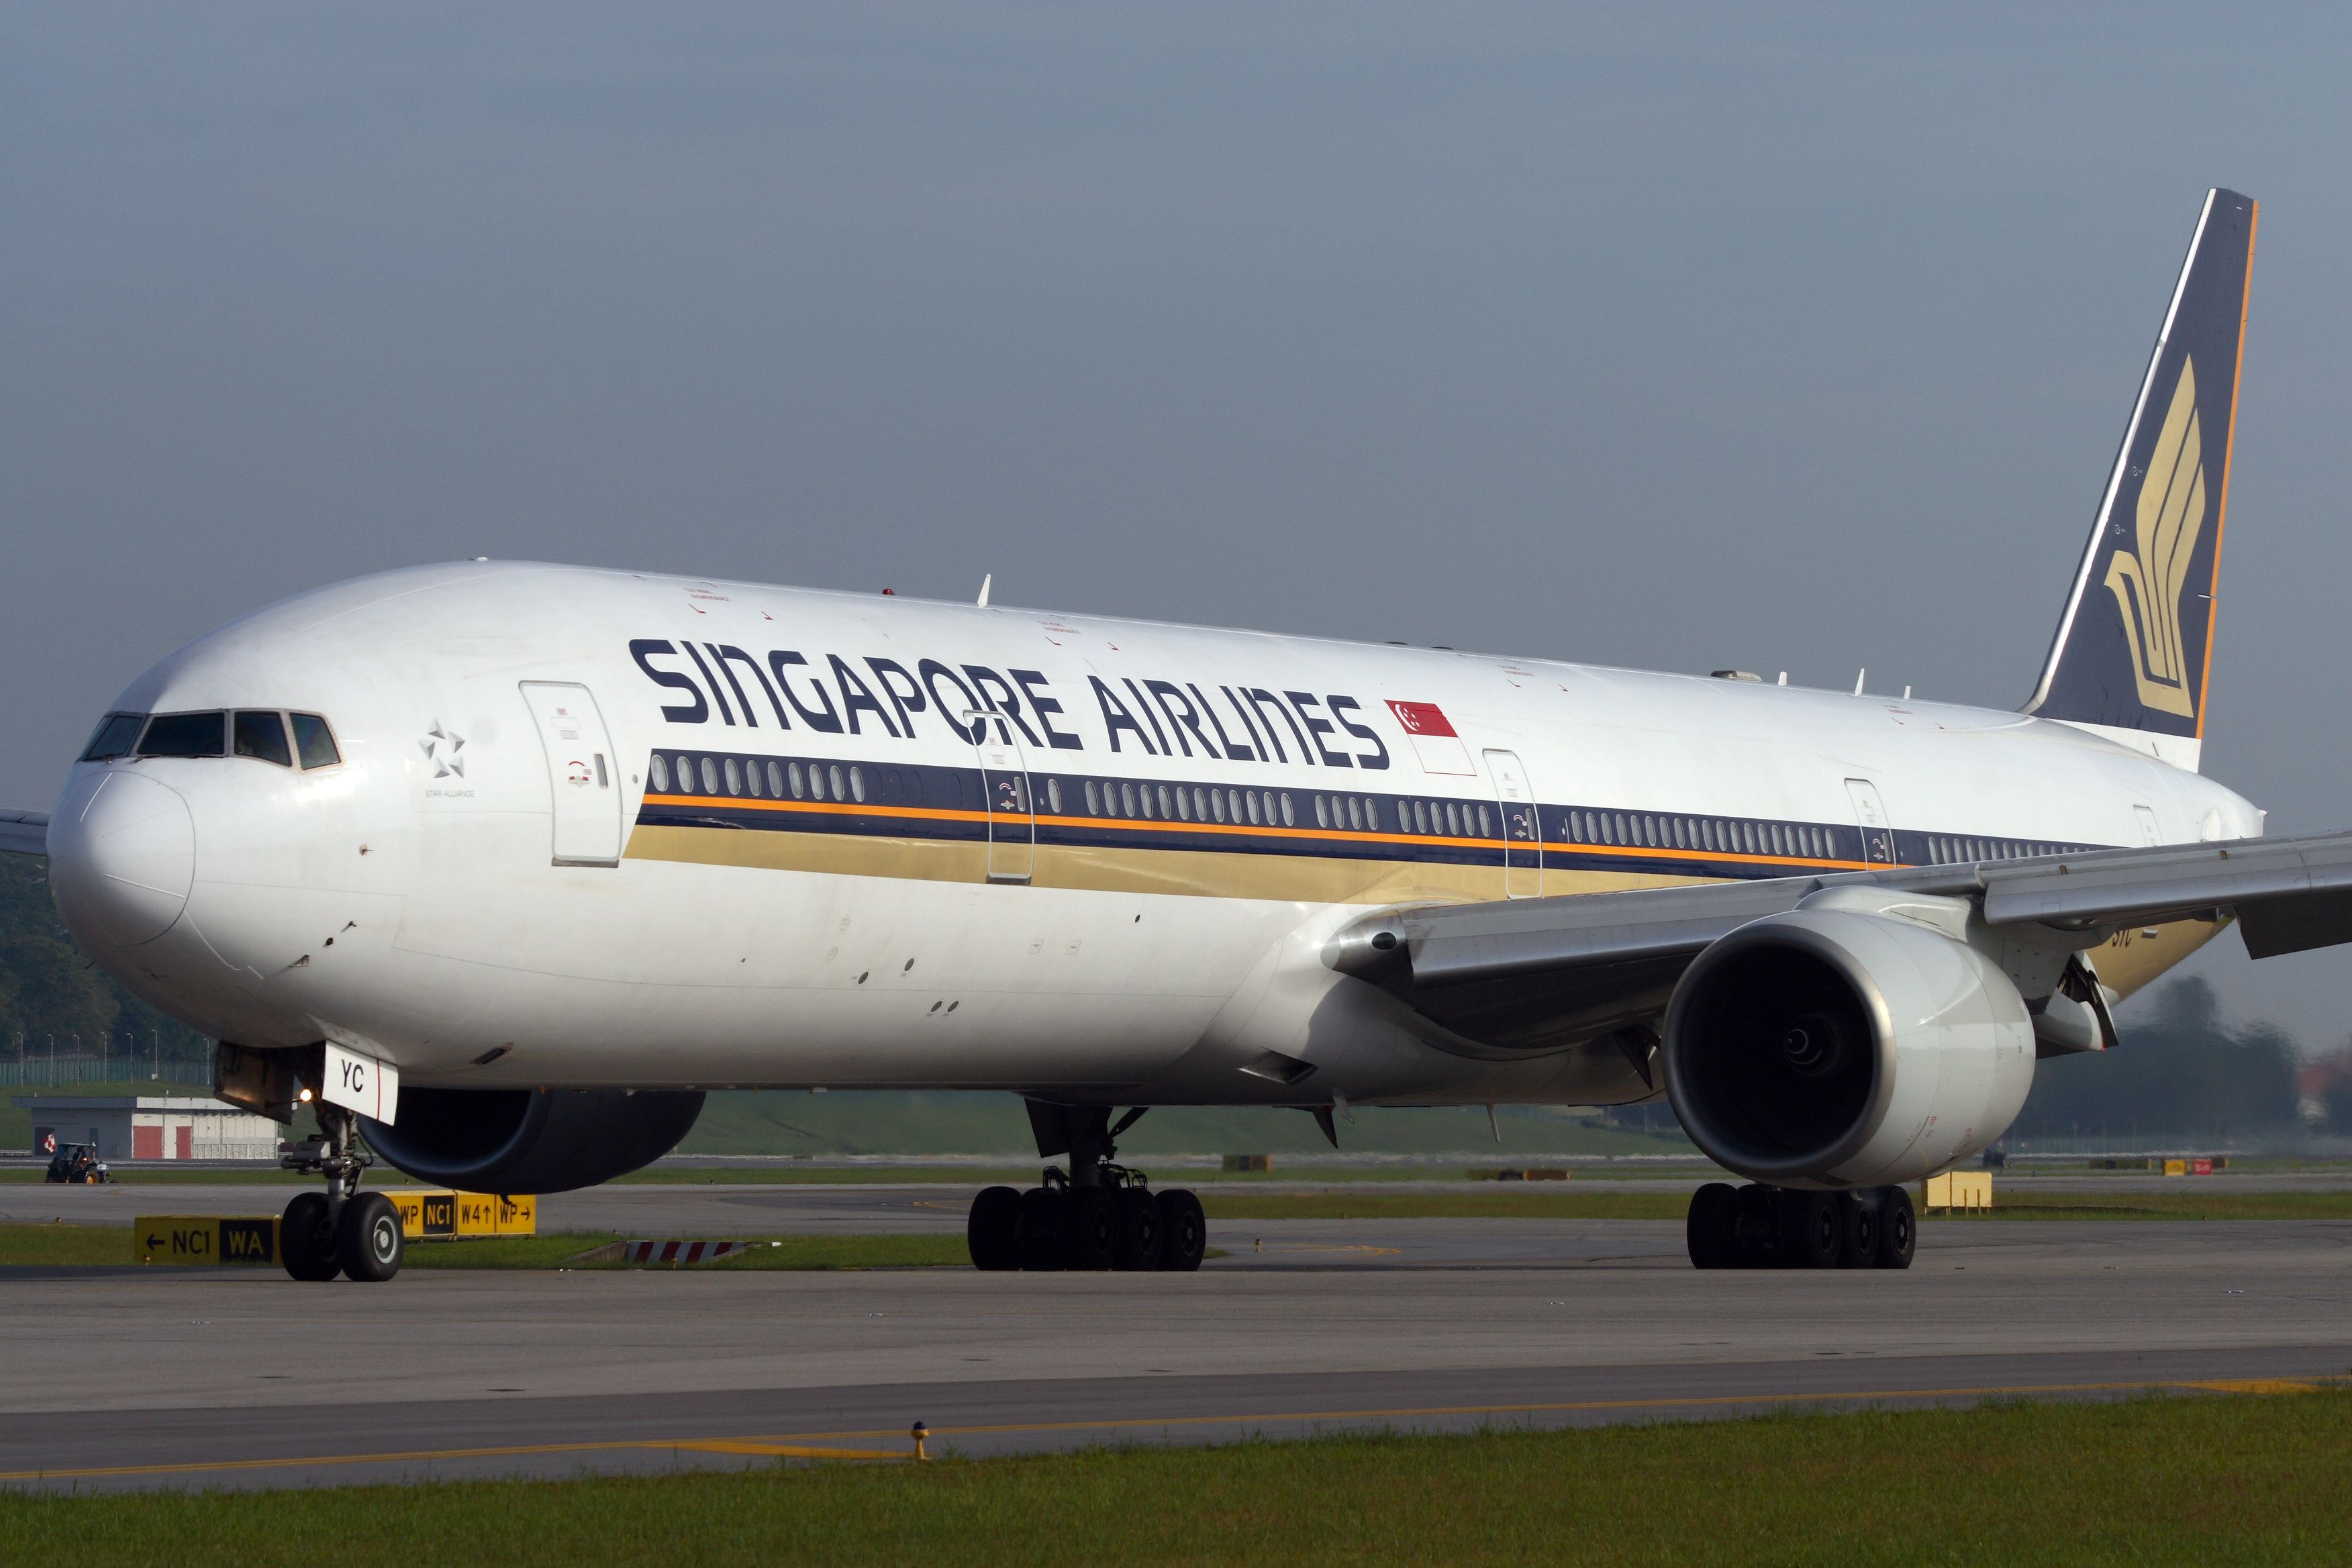 Singapore Airlines Boeing 737-300